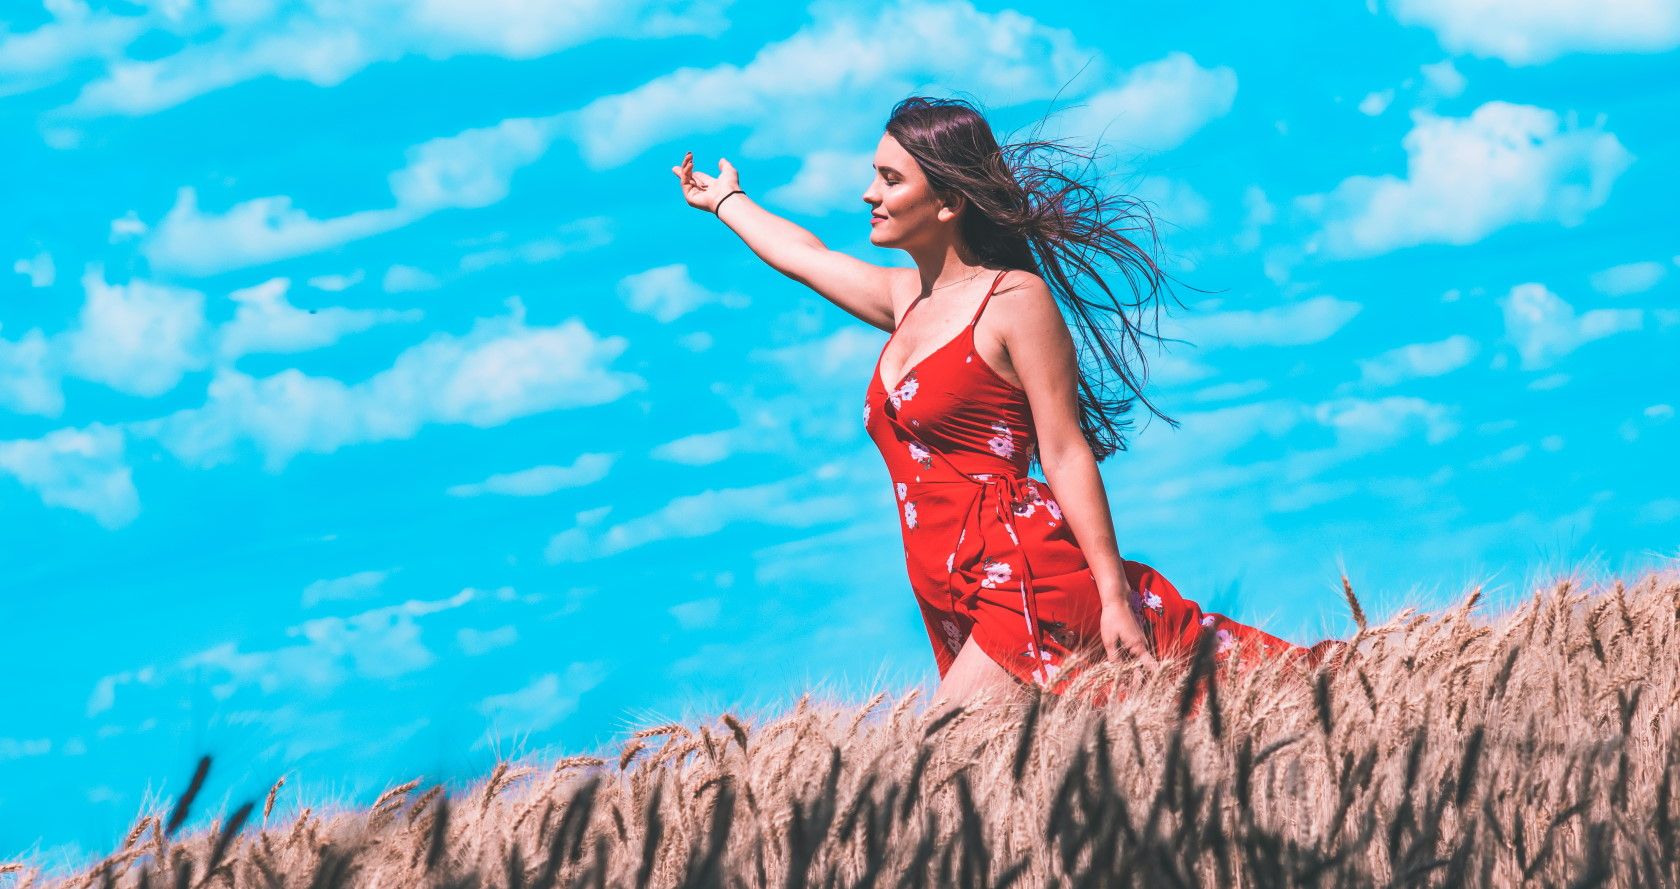 Woman walking through a field with wind blowing her hair